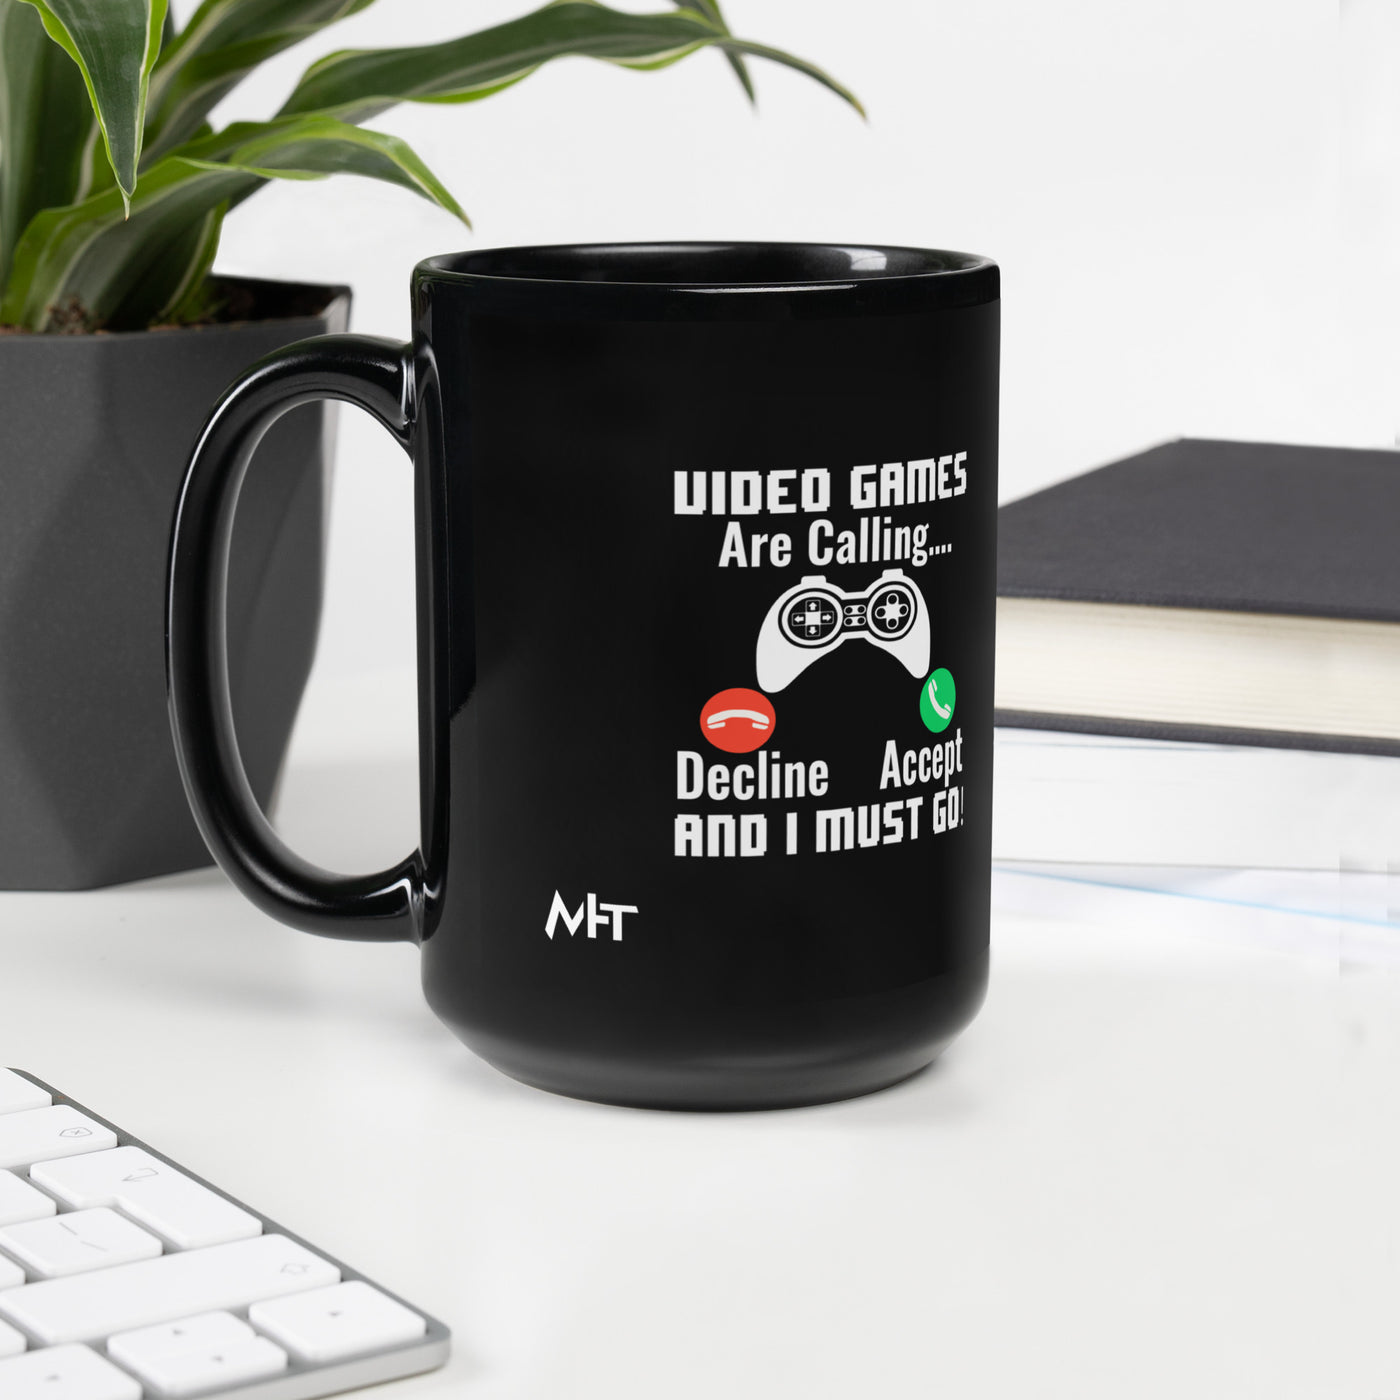 Video Games are Calling and I must Go Rima 18 - Black Glossy Mug